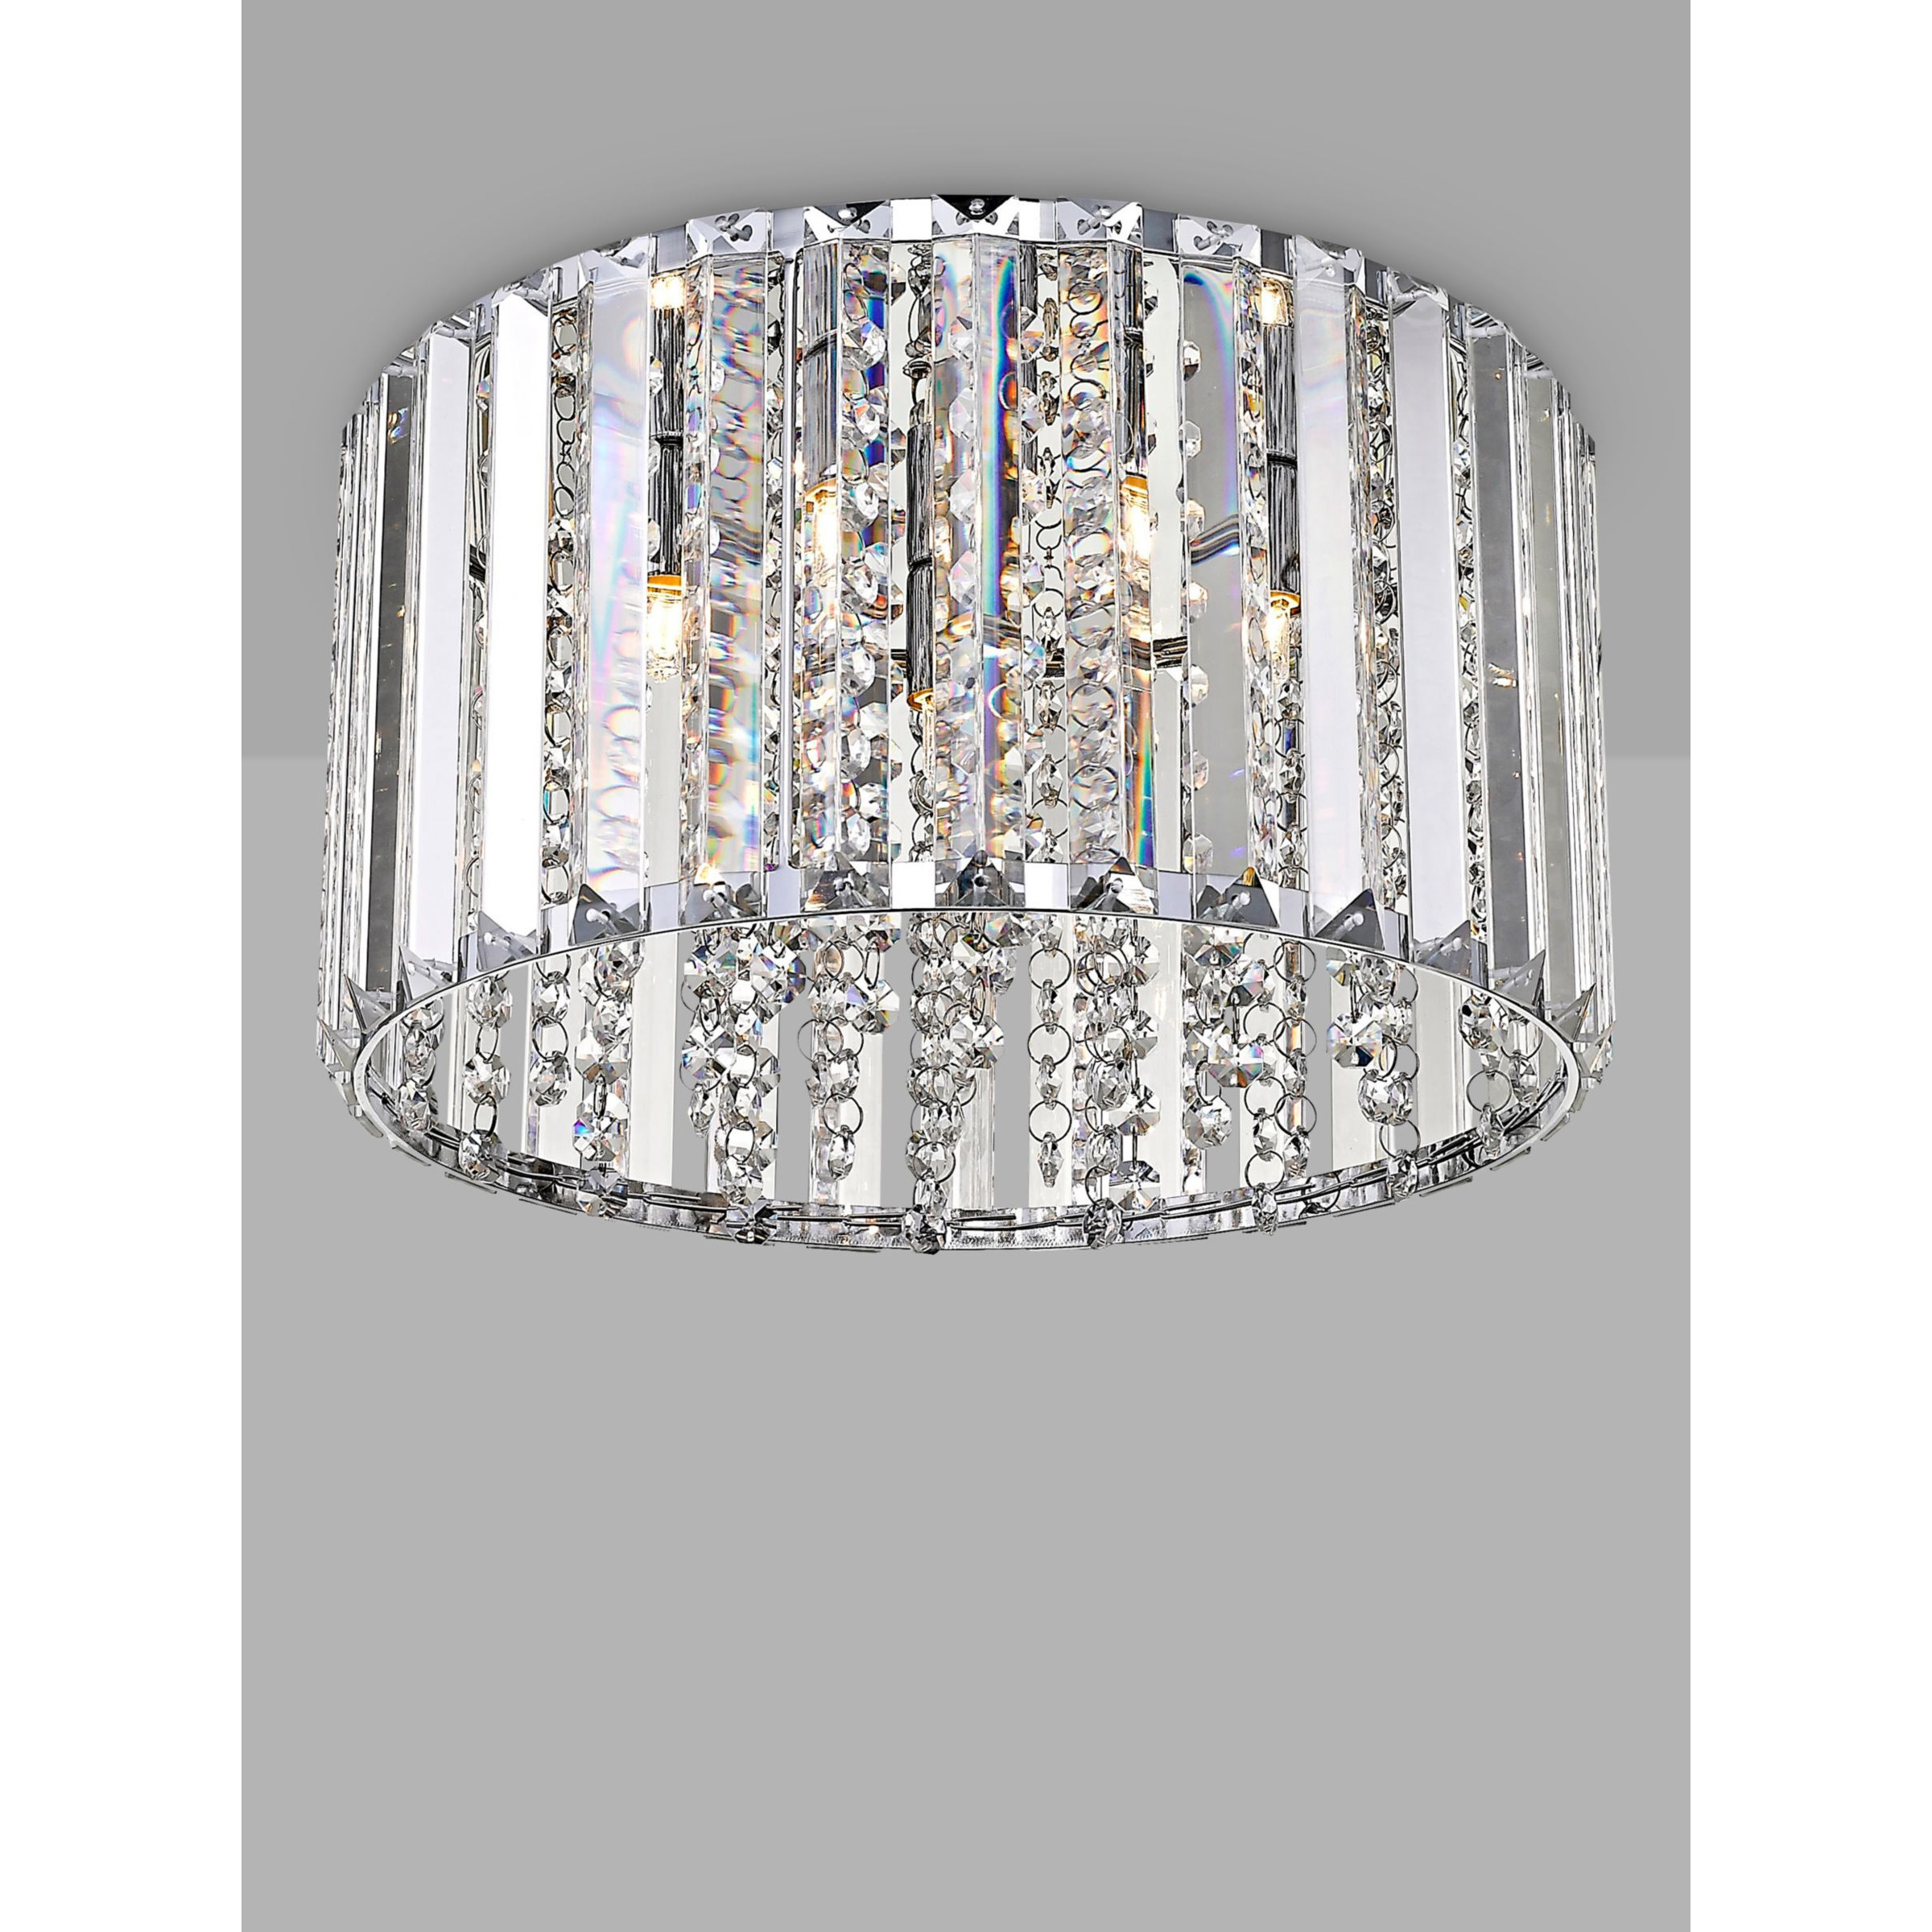 Impex Diore Crystal Flush Ceiling Light, Small, Chrome - image 1